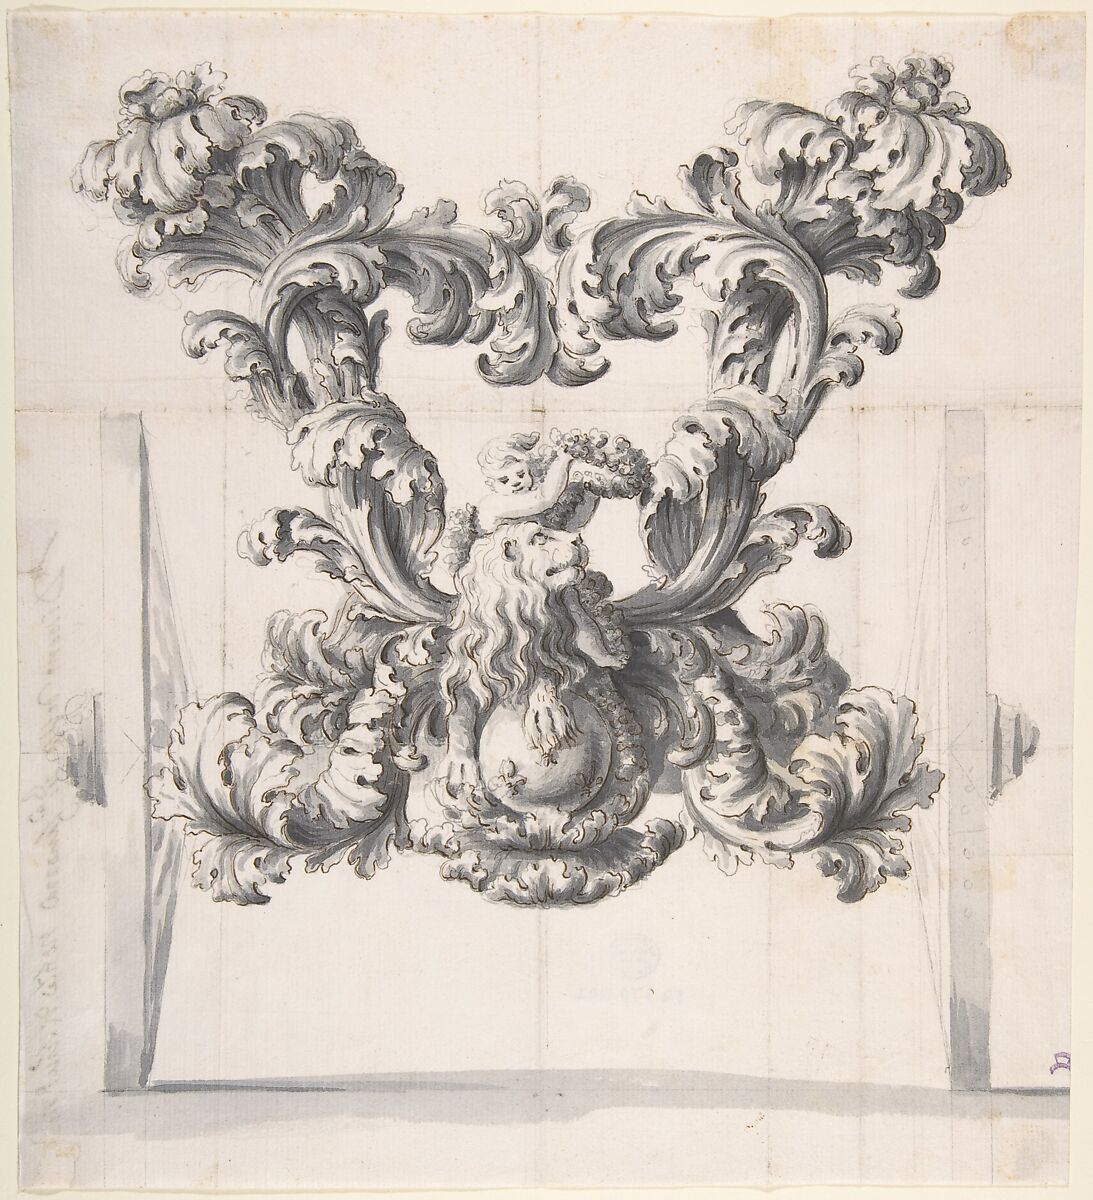 Rear View of an Elaborate Design for a Carriage with Acanthus Leaves and a Putto and Lion on top of a Ball with Three Fleurs-de-Lis, Anonymous, Italian, late 17th to early 18th century  Italian, Pen and brown ink, gray wash, over leadpoint